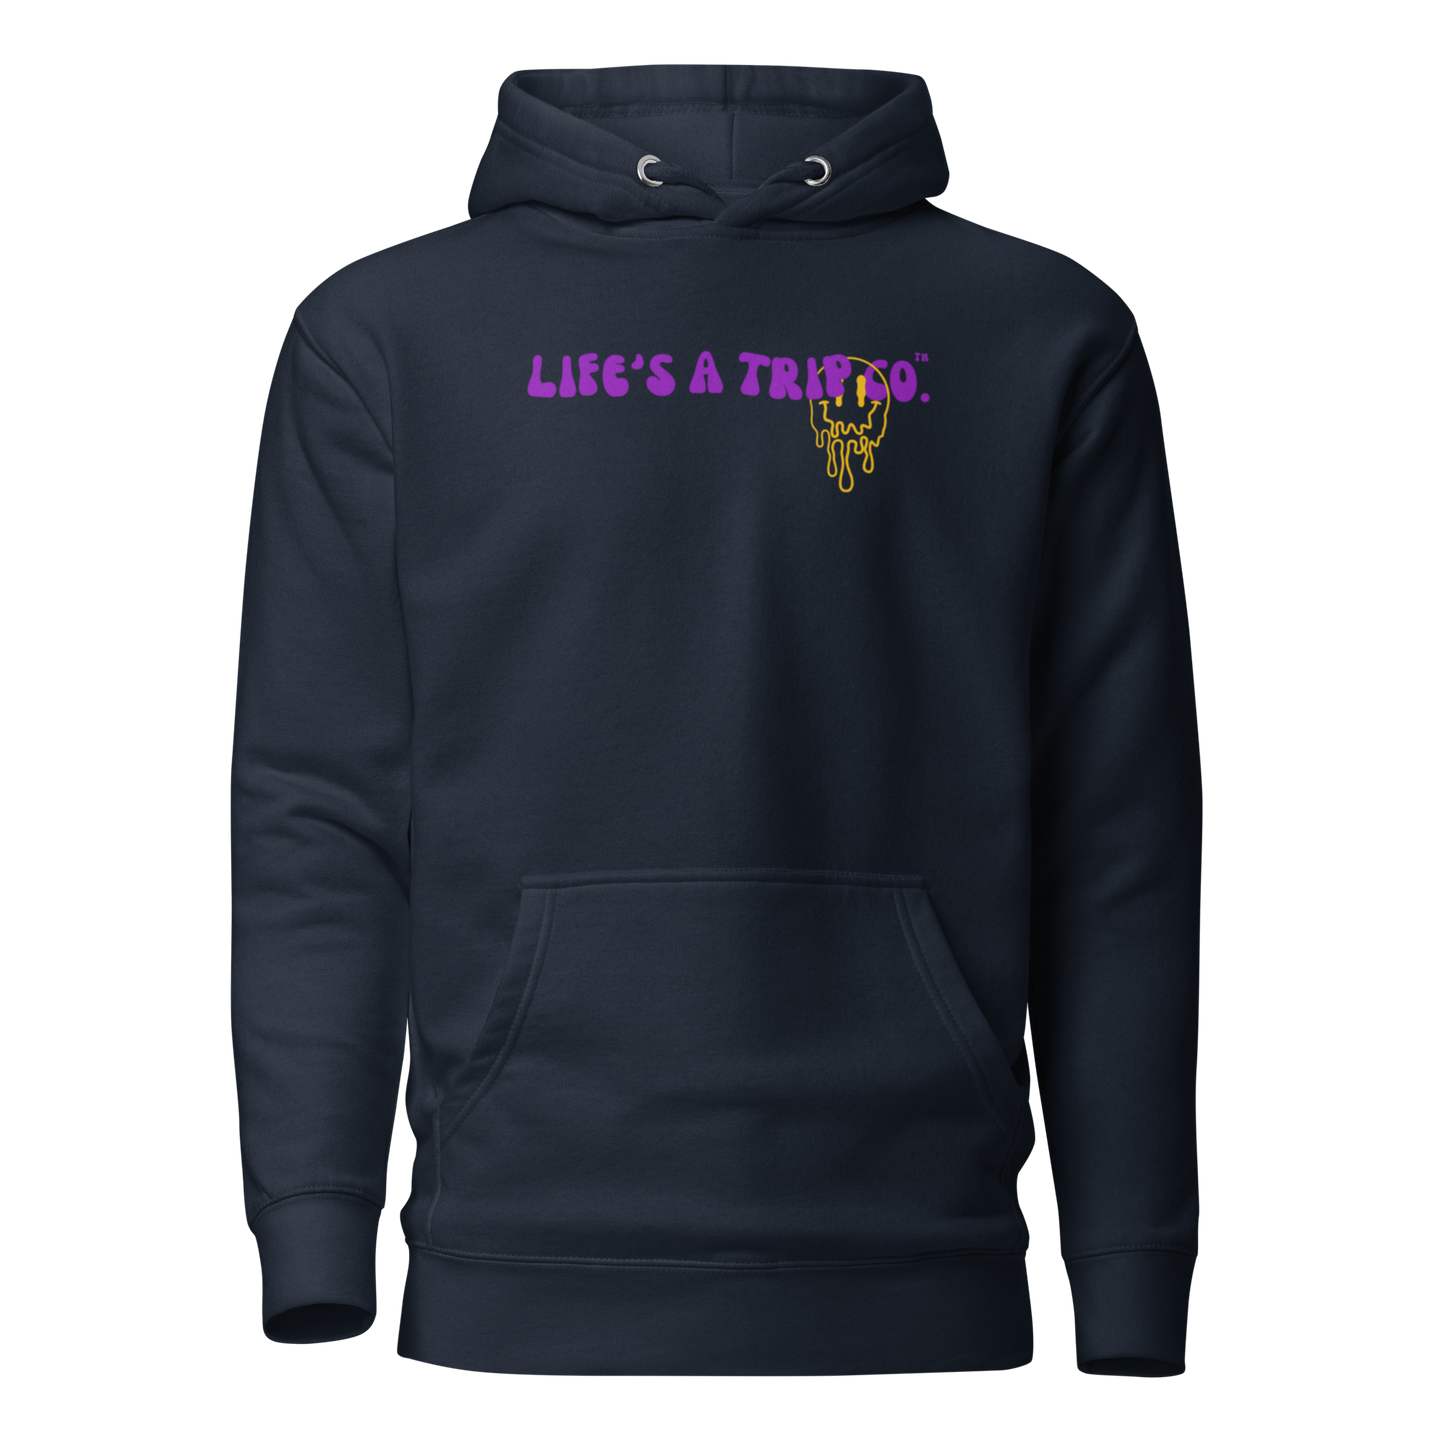 Life's a Trip Co.™ Stay Weird Premium Hoodie | Cotton Heritage M2580